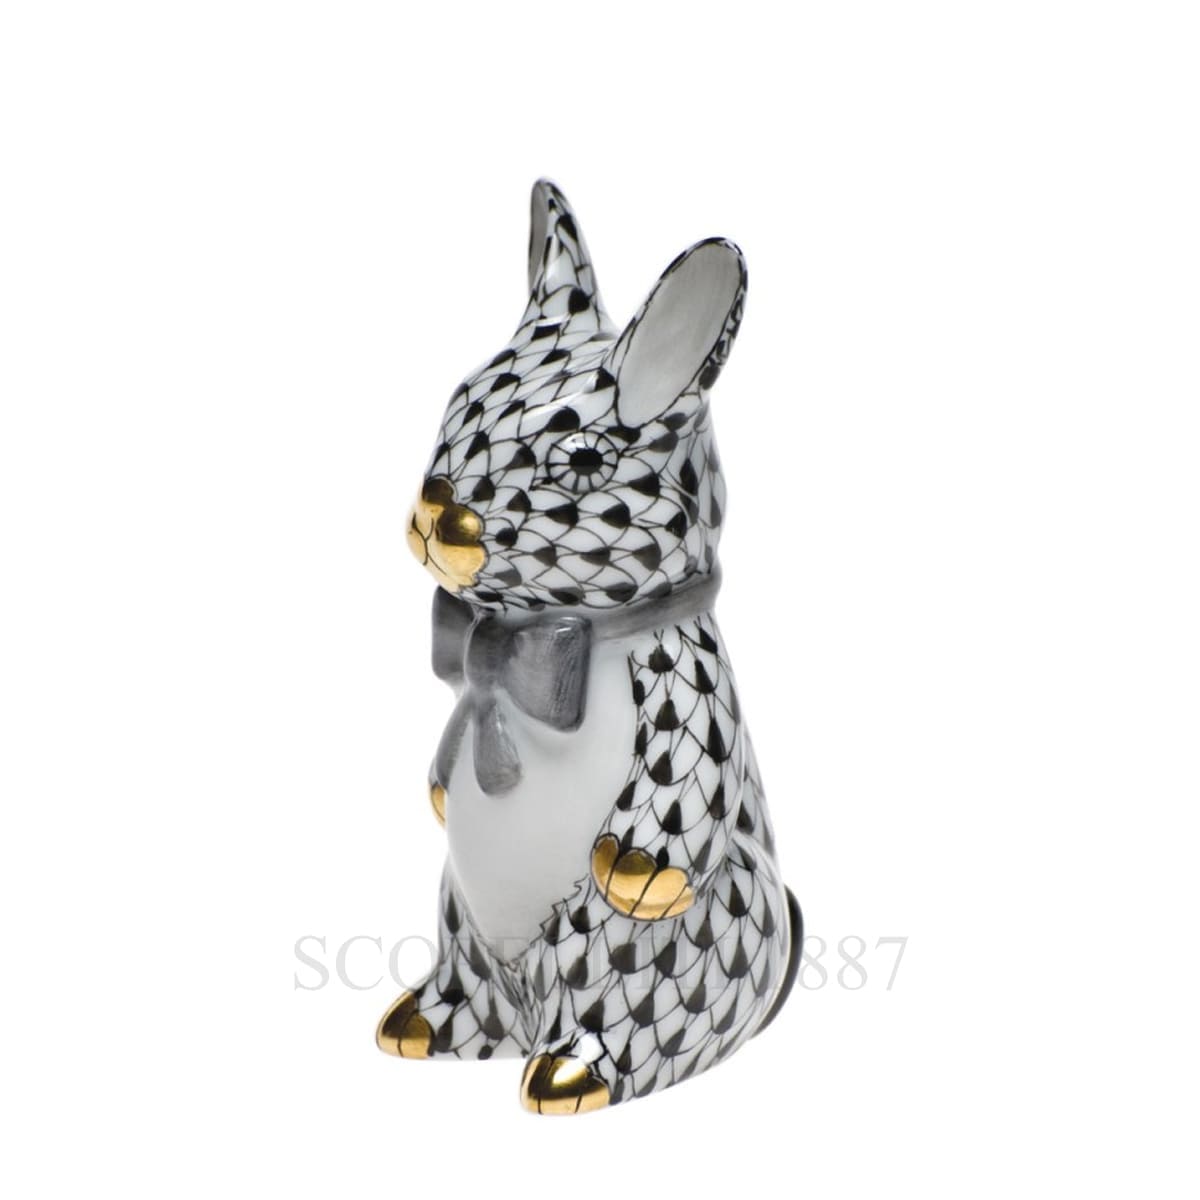 herend porcelain bunny figurine black and white